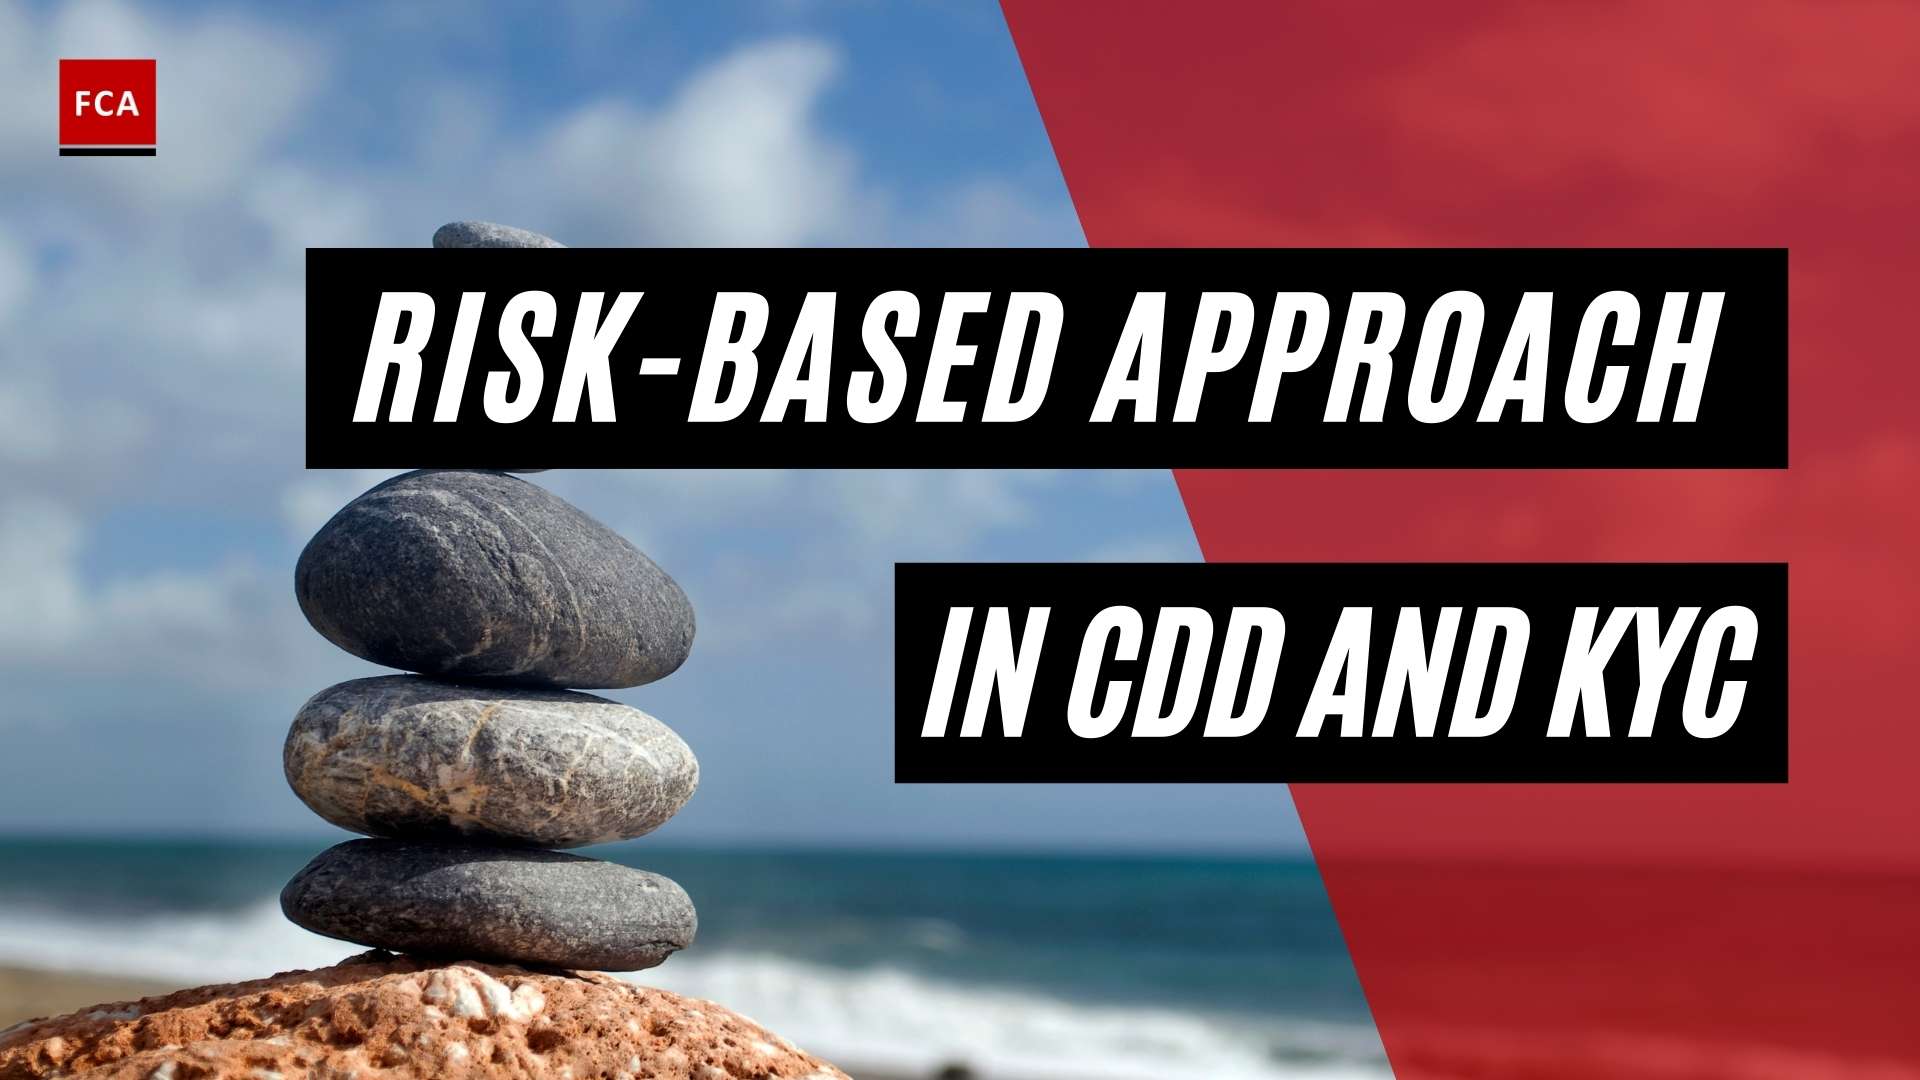 Risk Based Approach In Cdd And Kyc: Fight Against Financial Crimes - Featured Image